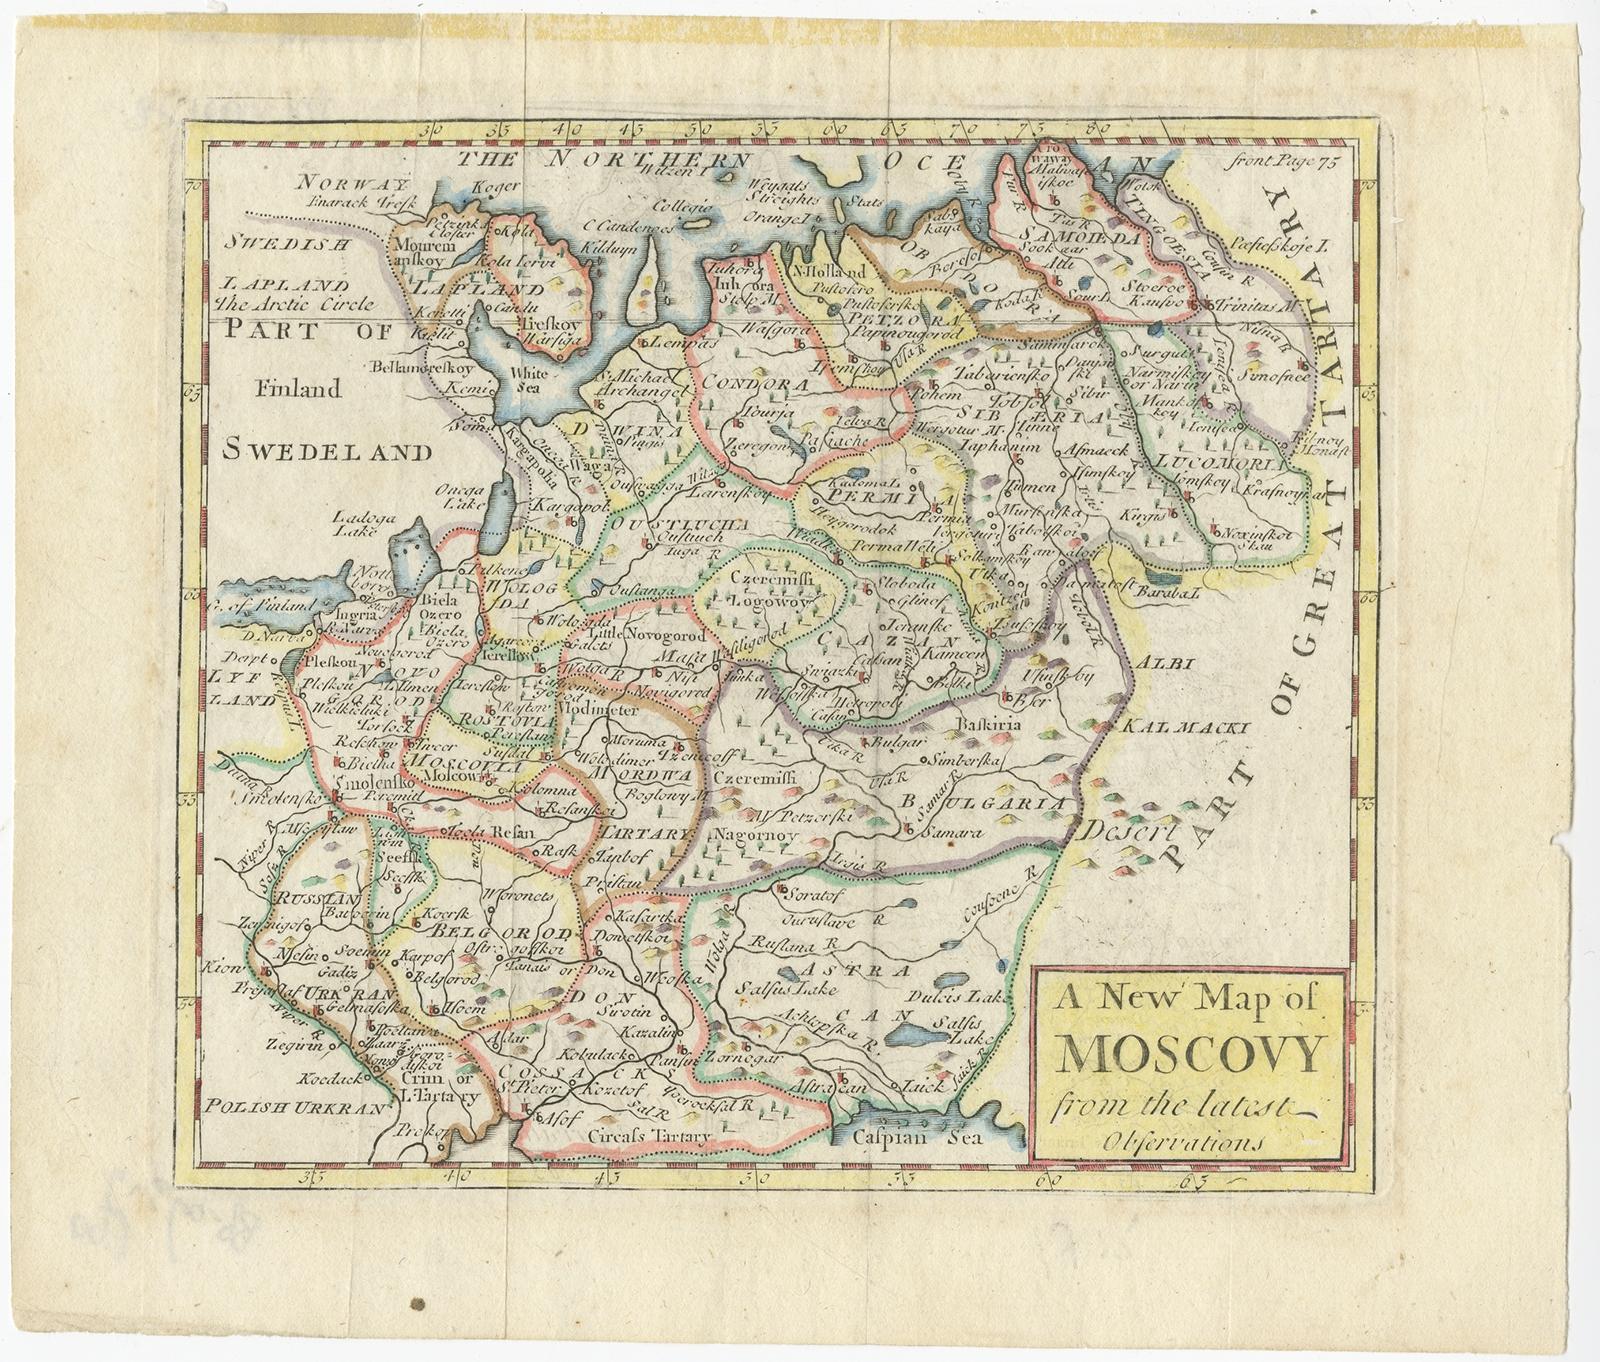 Antique map Russia titled 'A New Map of Moscovy from the latest observations'. 

Muscovy is an alternative name for the Grand Duchy of Moscow (1263–1547), the Tsardom of Russia (1547–1721), or (rarely) the Russian Empire (1721–1917).

Antique